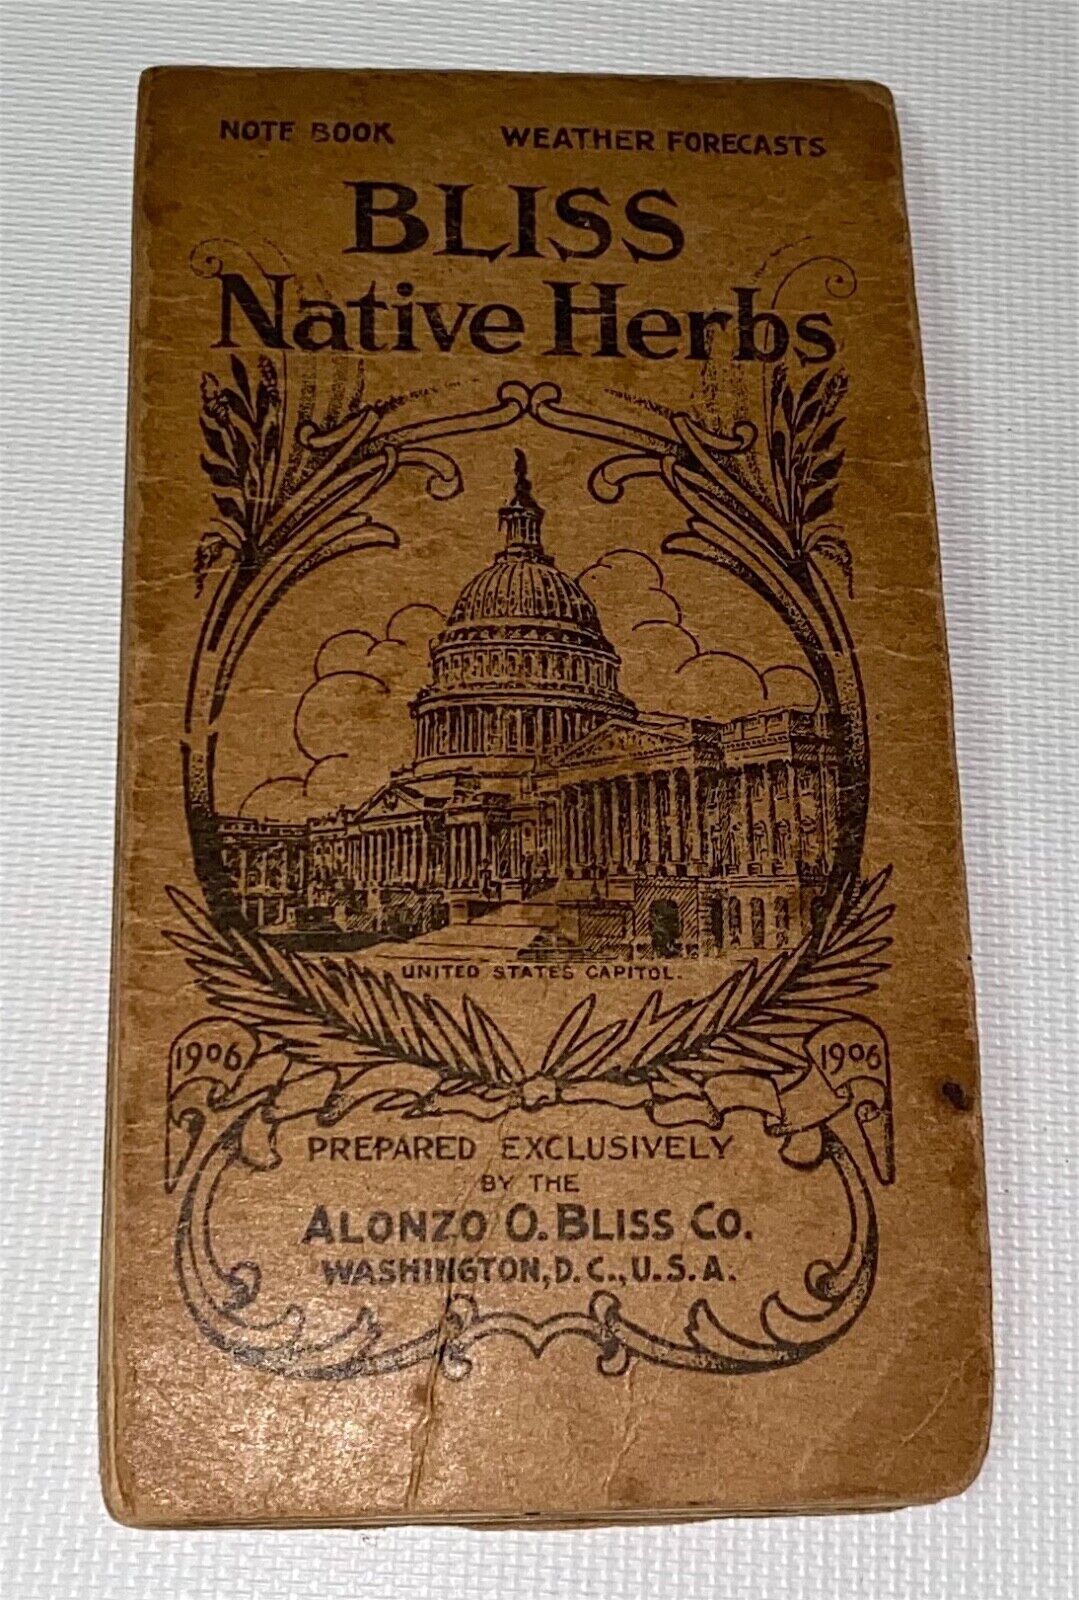 Rare Antique American Bliss Native Herbs Advertising Notebook US Capitol 1906